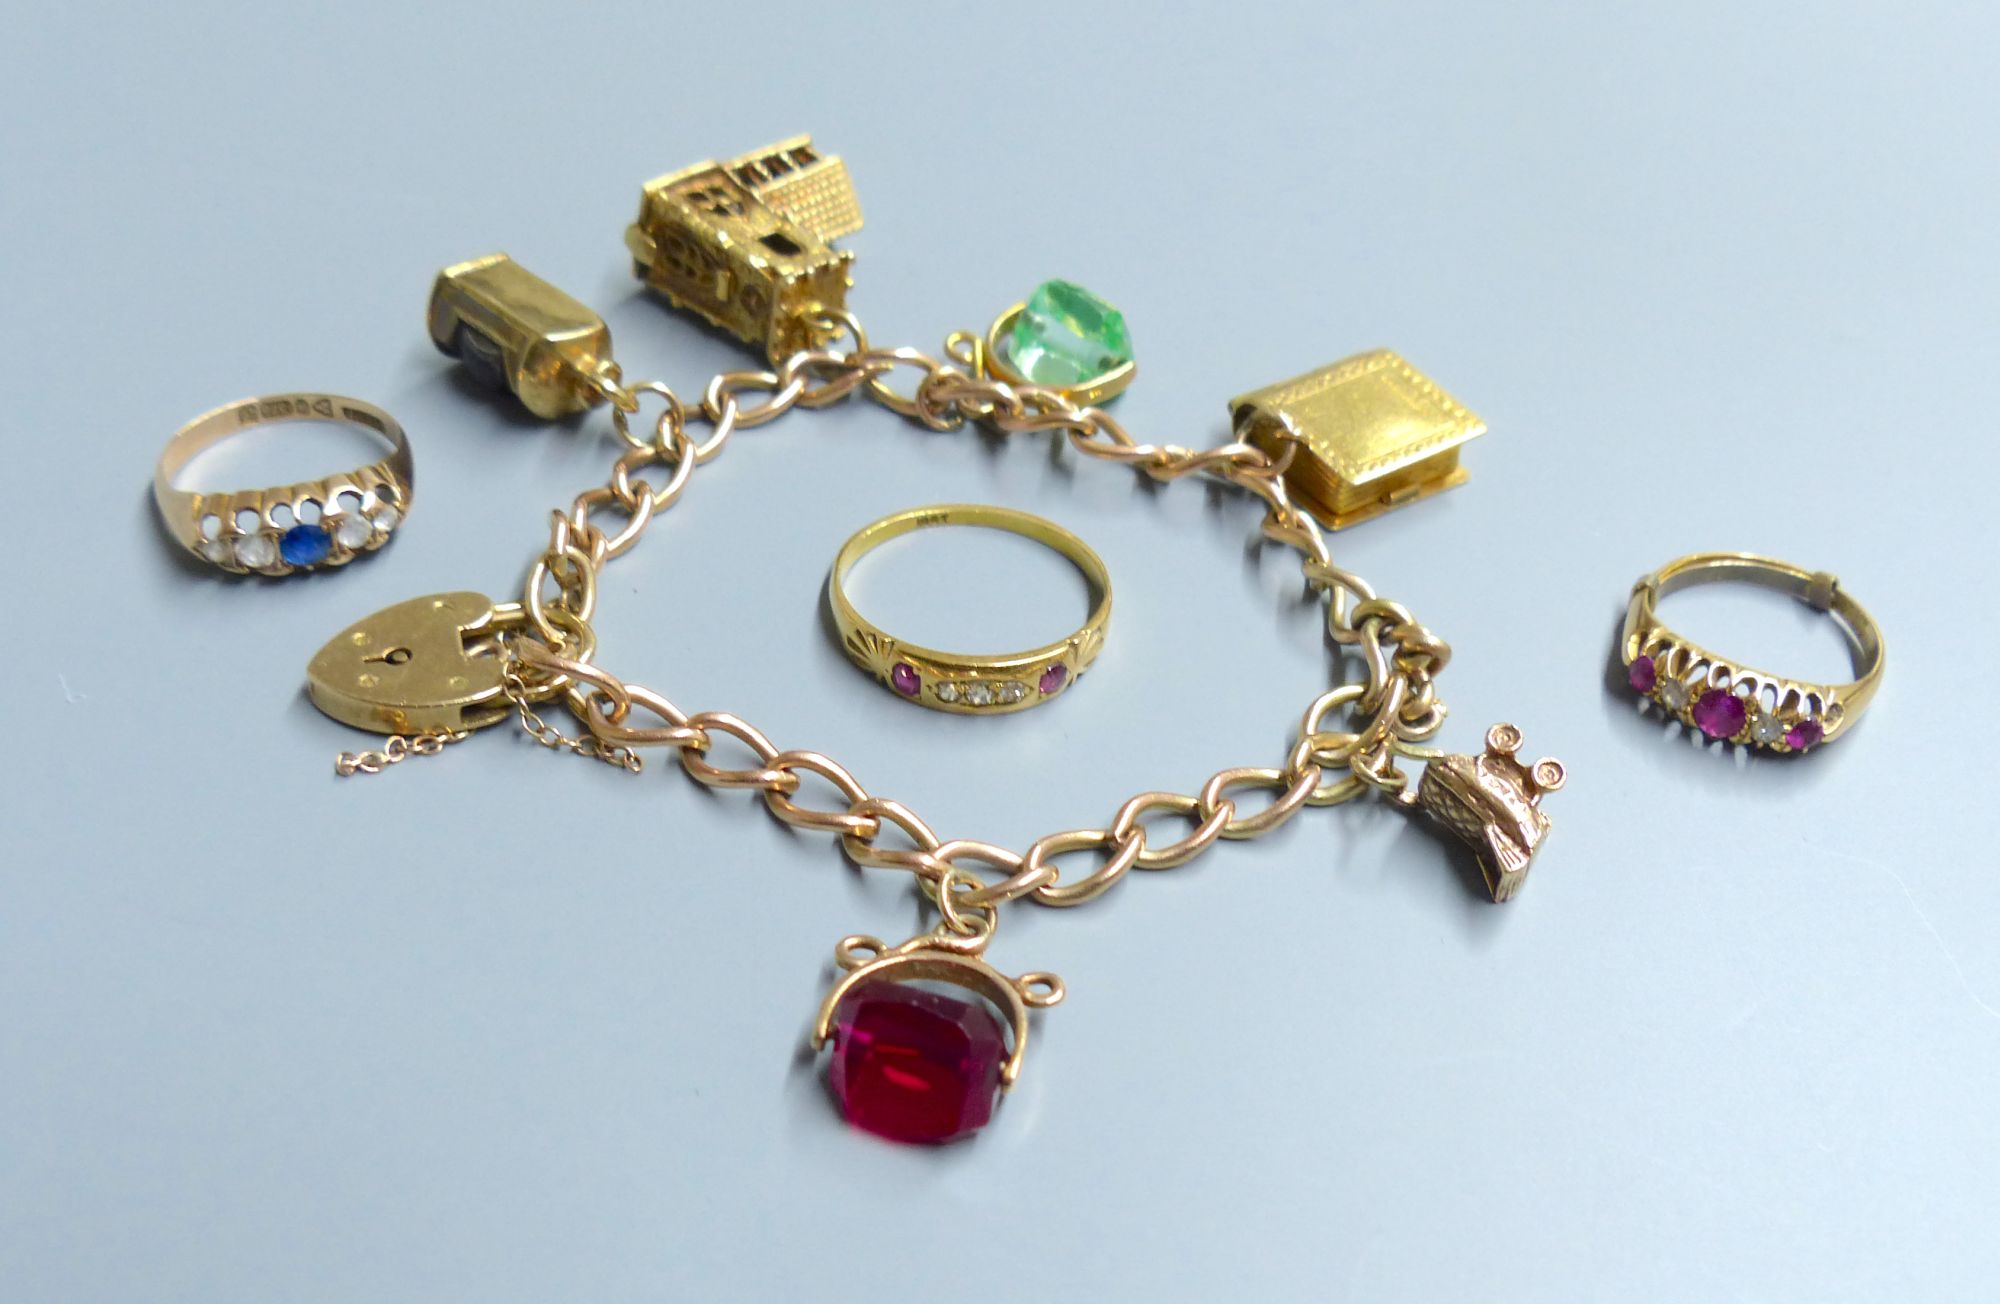 A 9ct gold charm bracelet, hung with six assorted charms including 9ct gold and 3 rings.